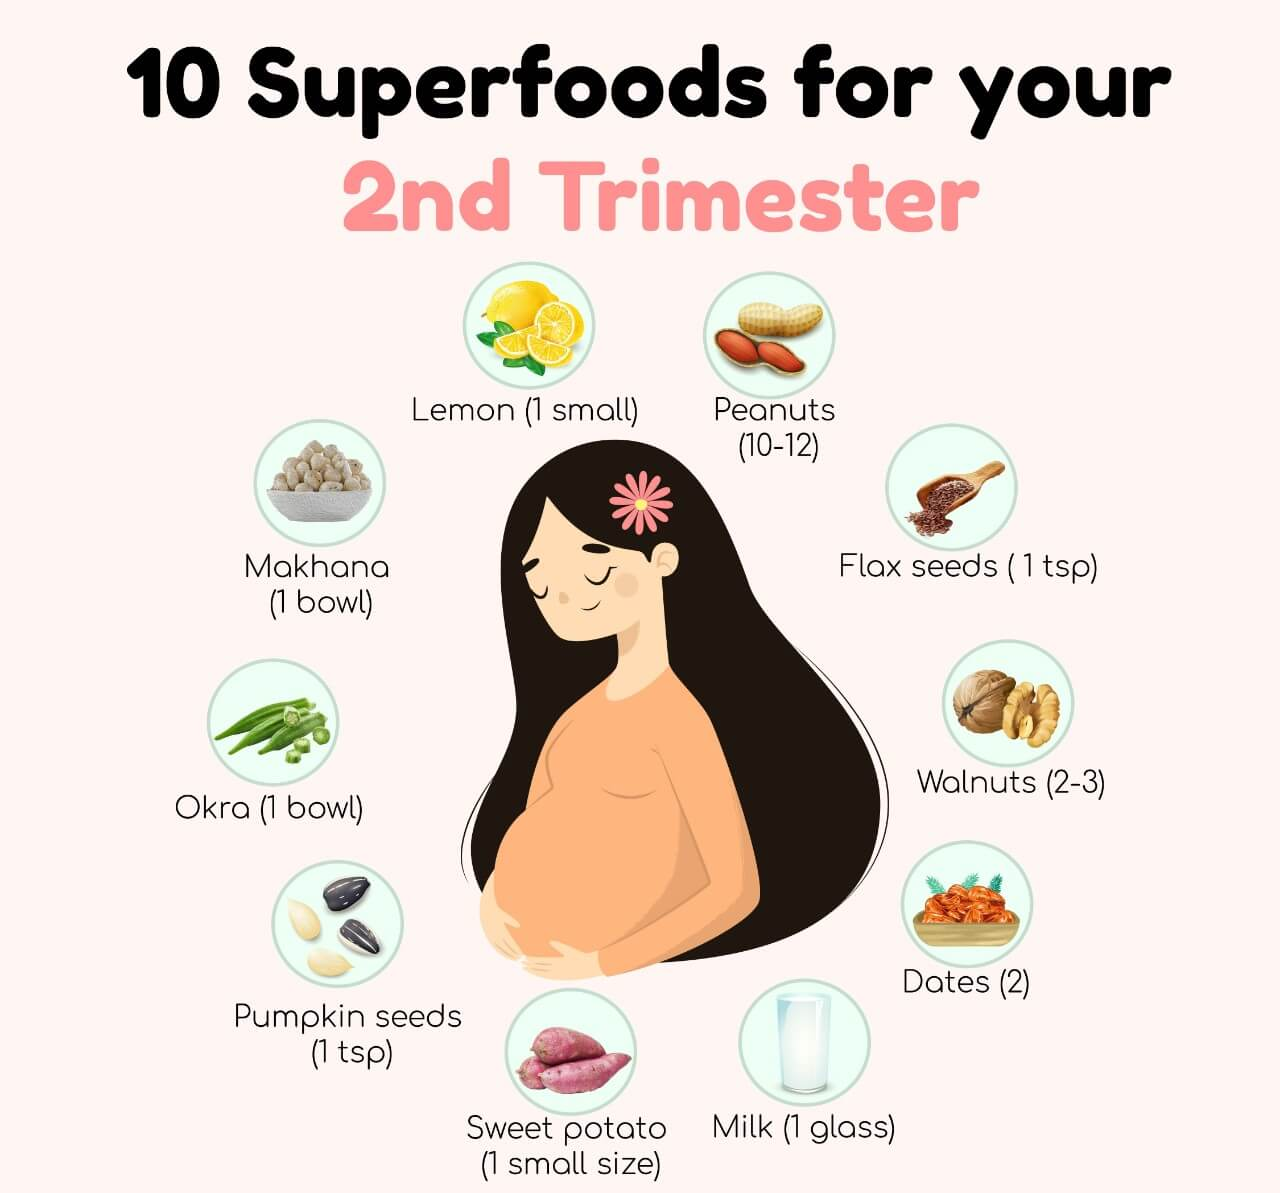 10 Superfoods for the Second Trimester of Pregnancy - Nutrition By